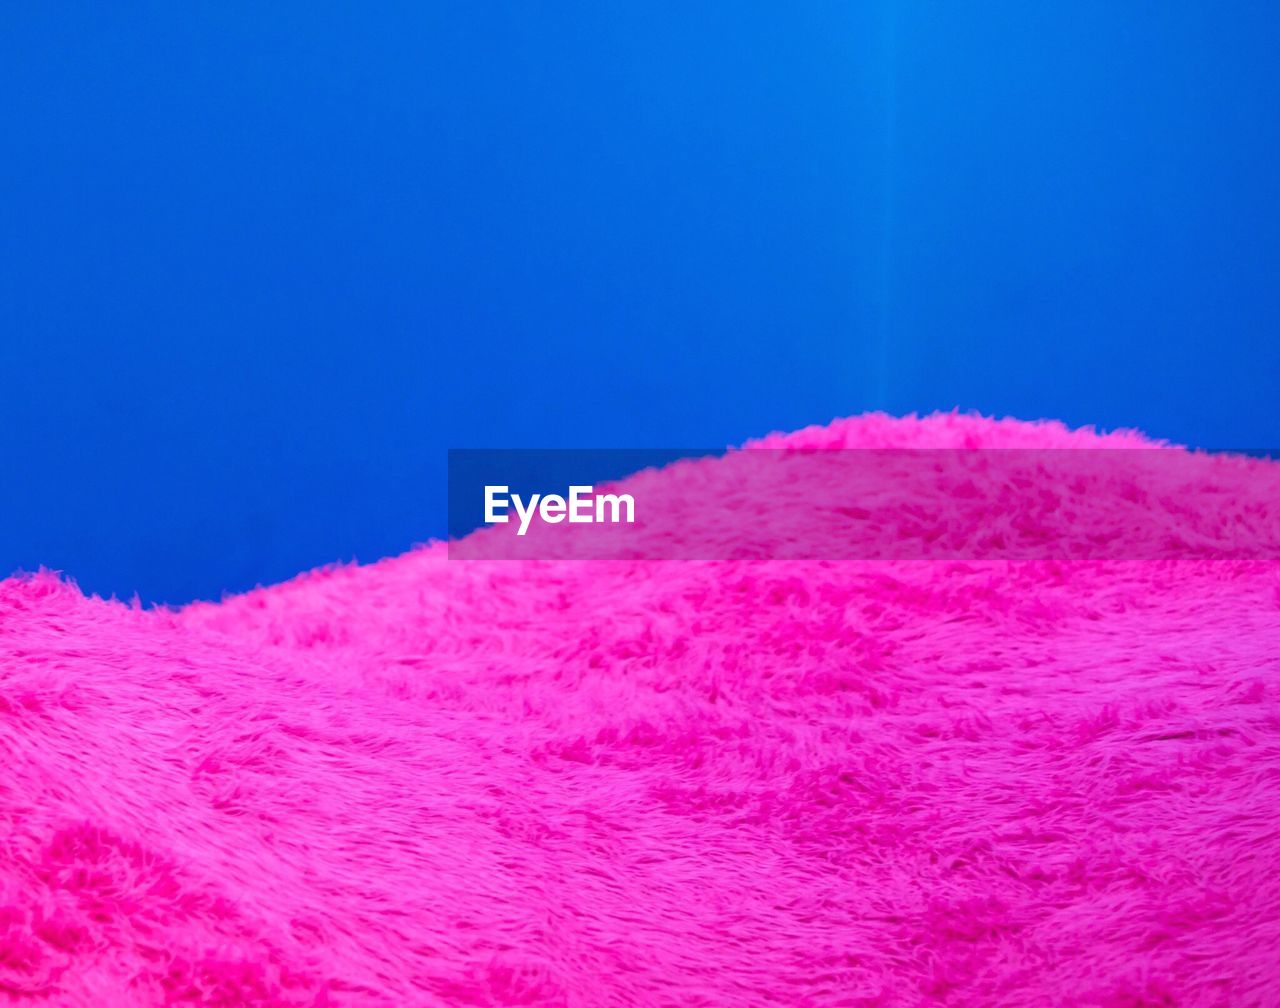 Fluffy pink textile